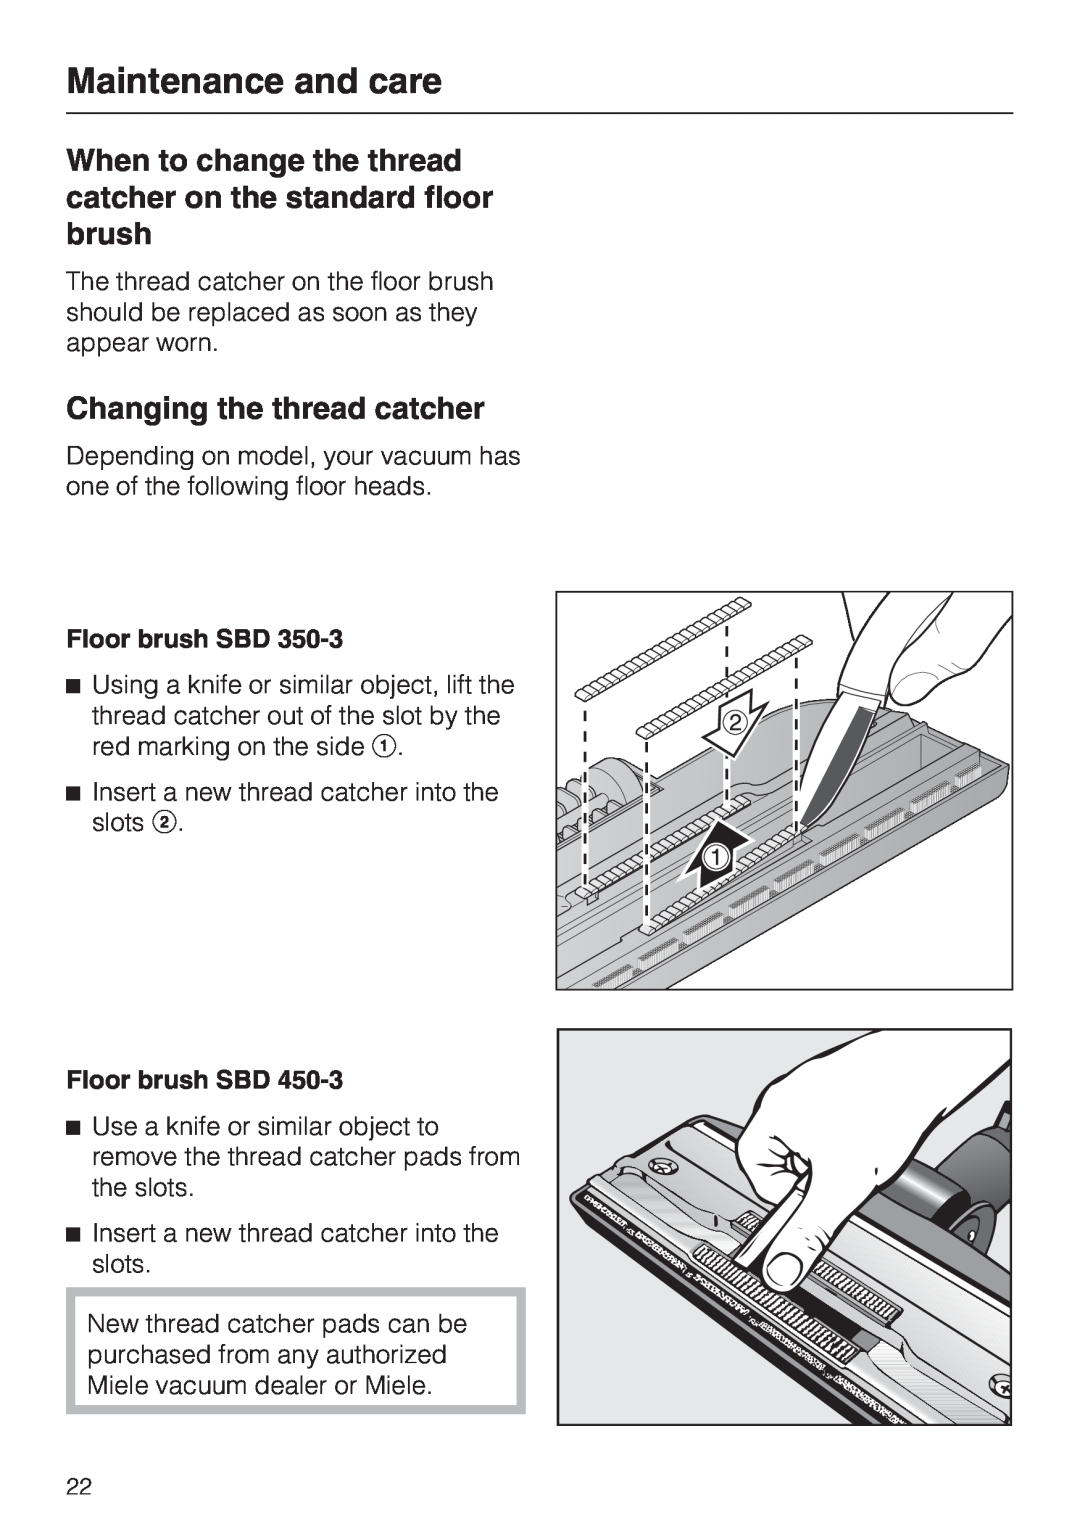 Miele HS12, S 2000, S 2120 manual Changing the thread catcher, Floor brush SBD, Maintenance and care 